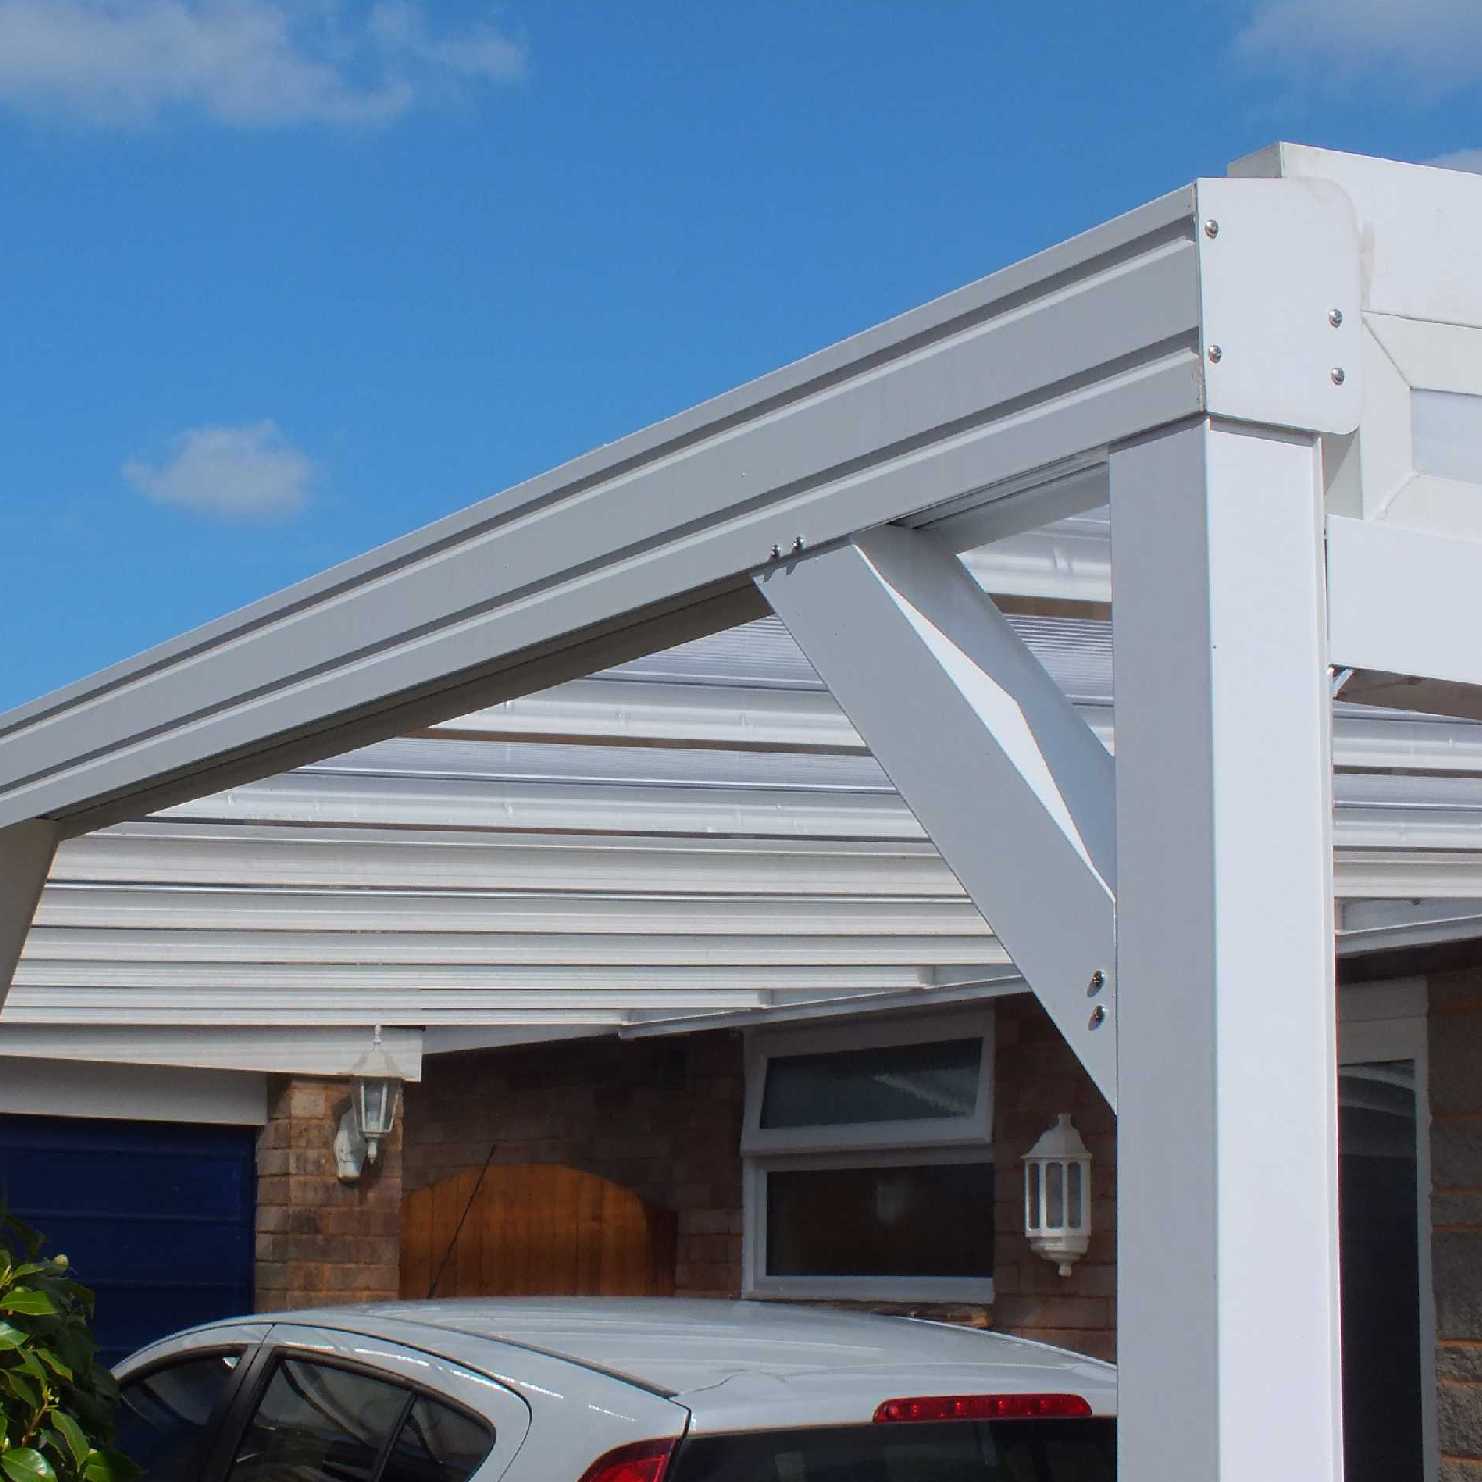 Buy Omega Smart Lean-To Canopy, White with 16mm Polycarbonate Glazing - 2.1m (W) x 3.5m (P), (2) Supporting Posts online today